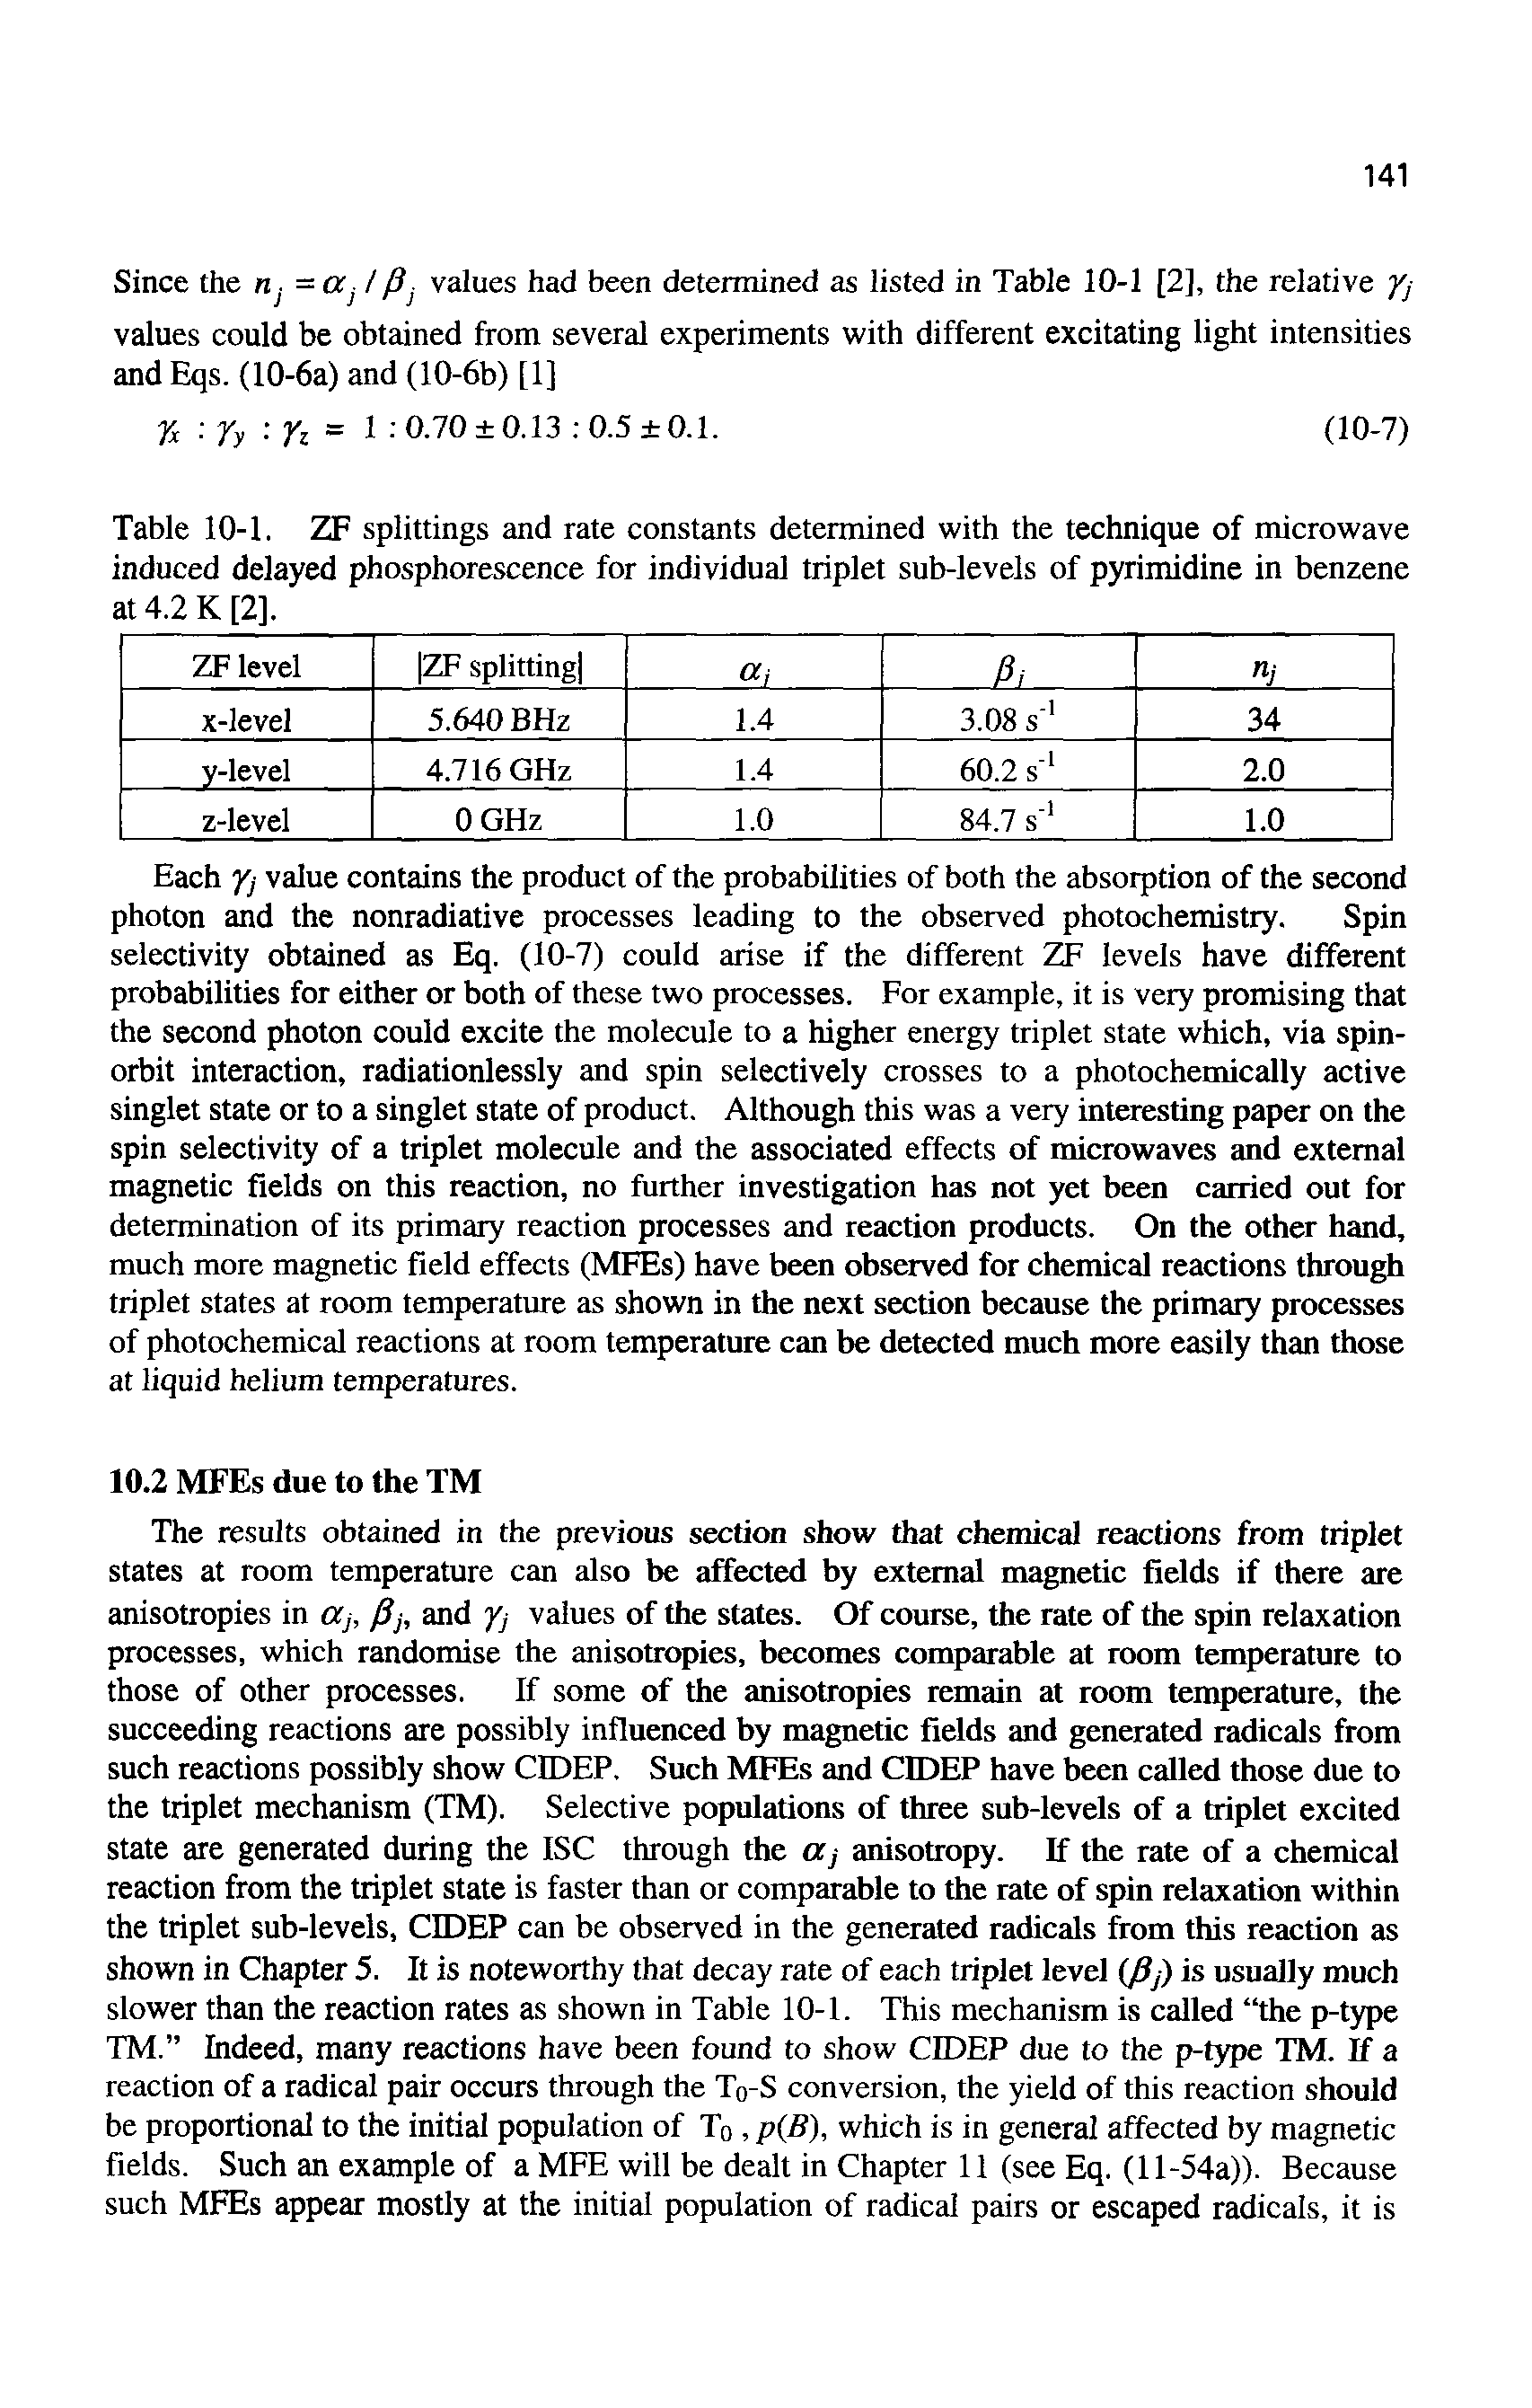 Table 10-1. ZF splittings and rate constants determined with the technique of microwave induced delayed phosphorescence for individual triplet sub-levels of pyrimidine in benzene at 4.2 K [2].